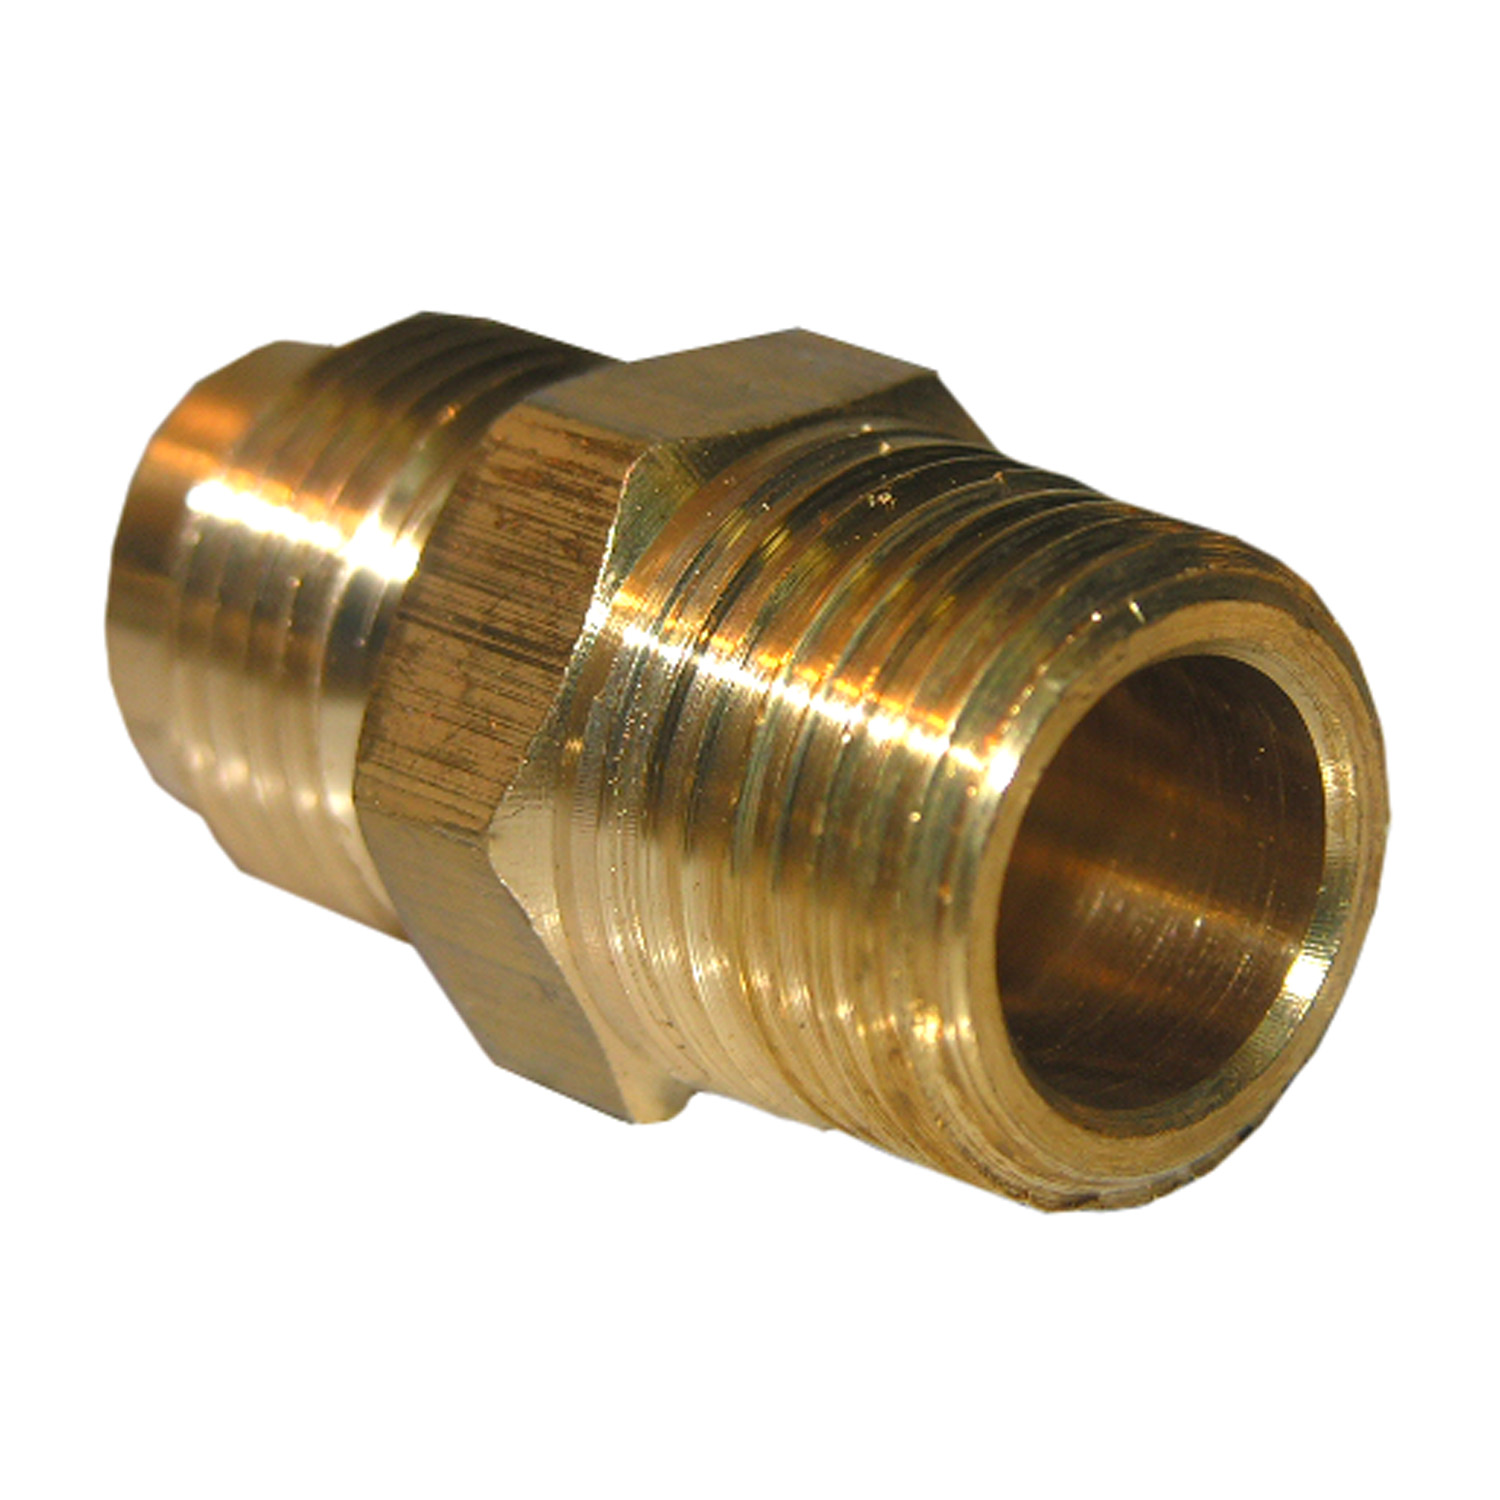 17-4831 Pipe Adapter, 3/8 in, Male Flare x MPT, Brass, 900 psi Pressure